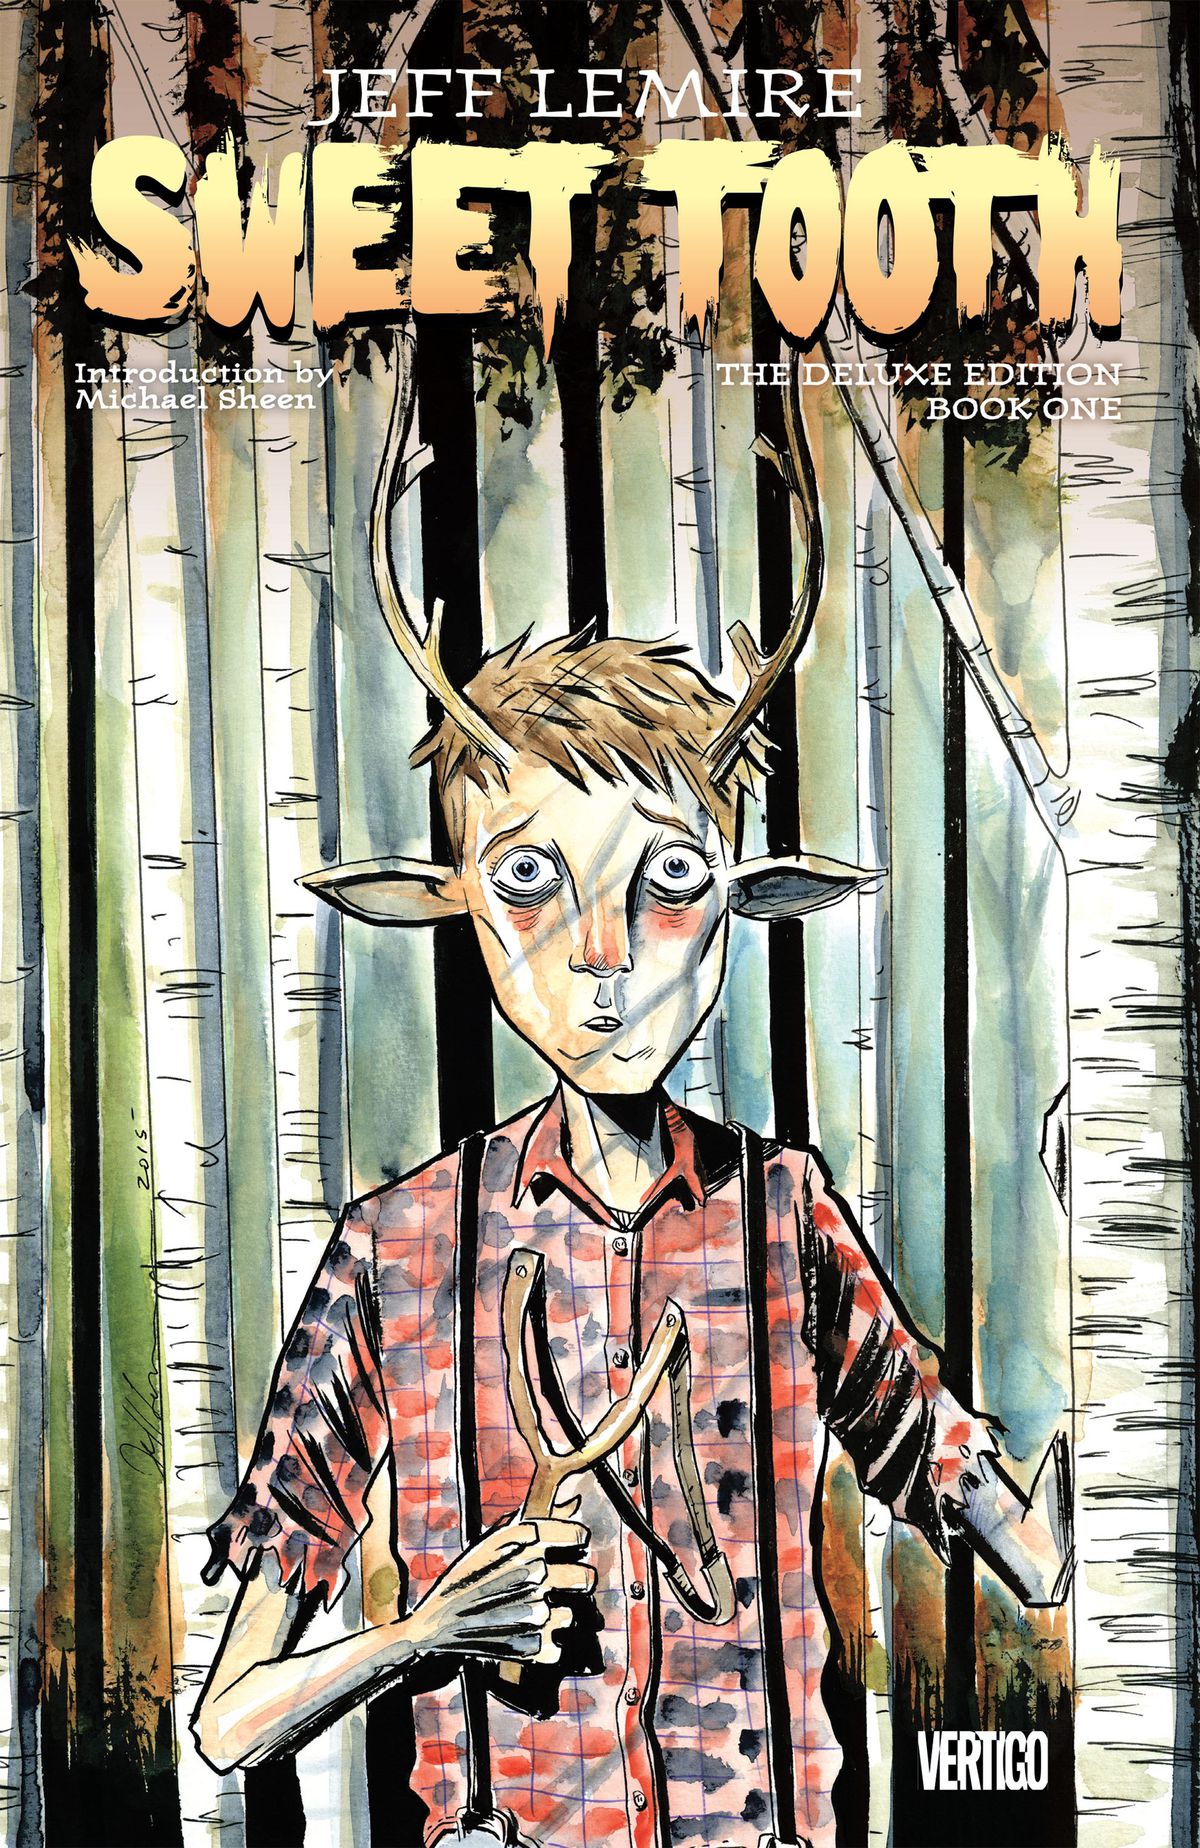 Gus, a boy with deer ears and antlers holds a slingshot timidly in a birch forest on the cover of Sweet Tooth: The Deluxe Edition. 